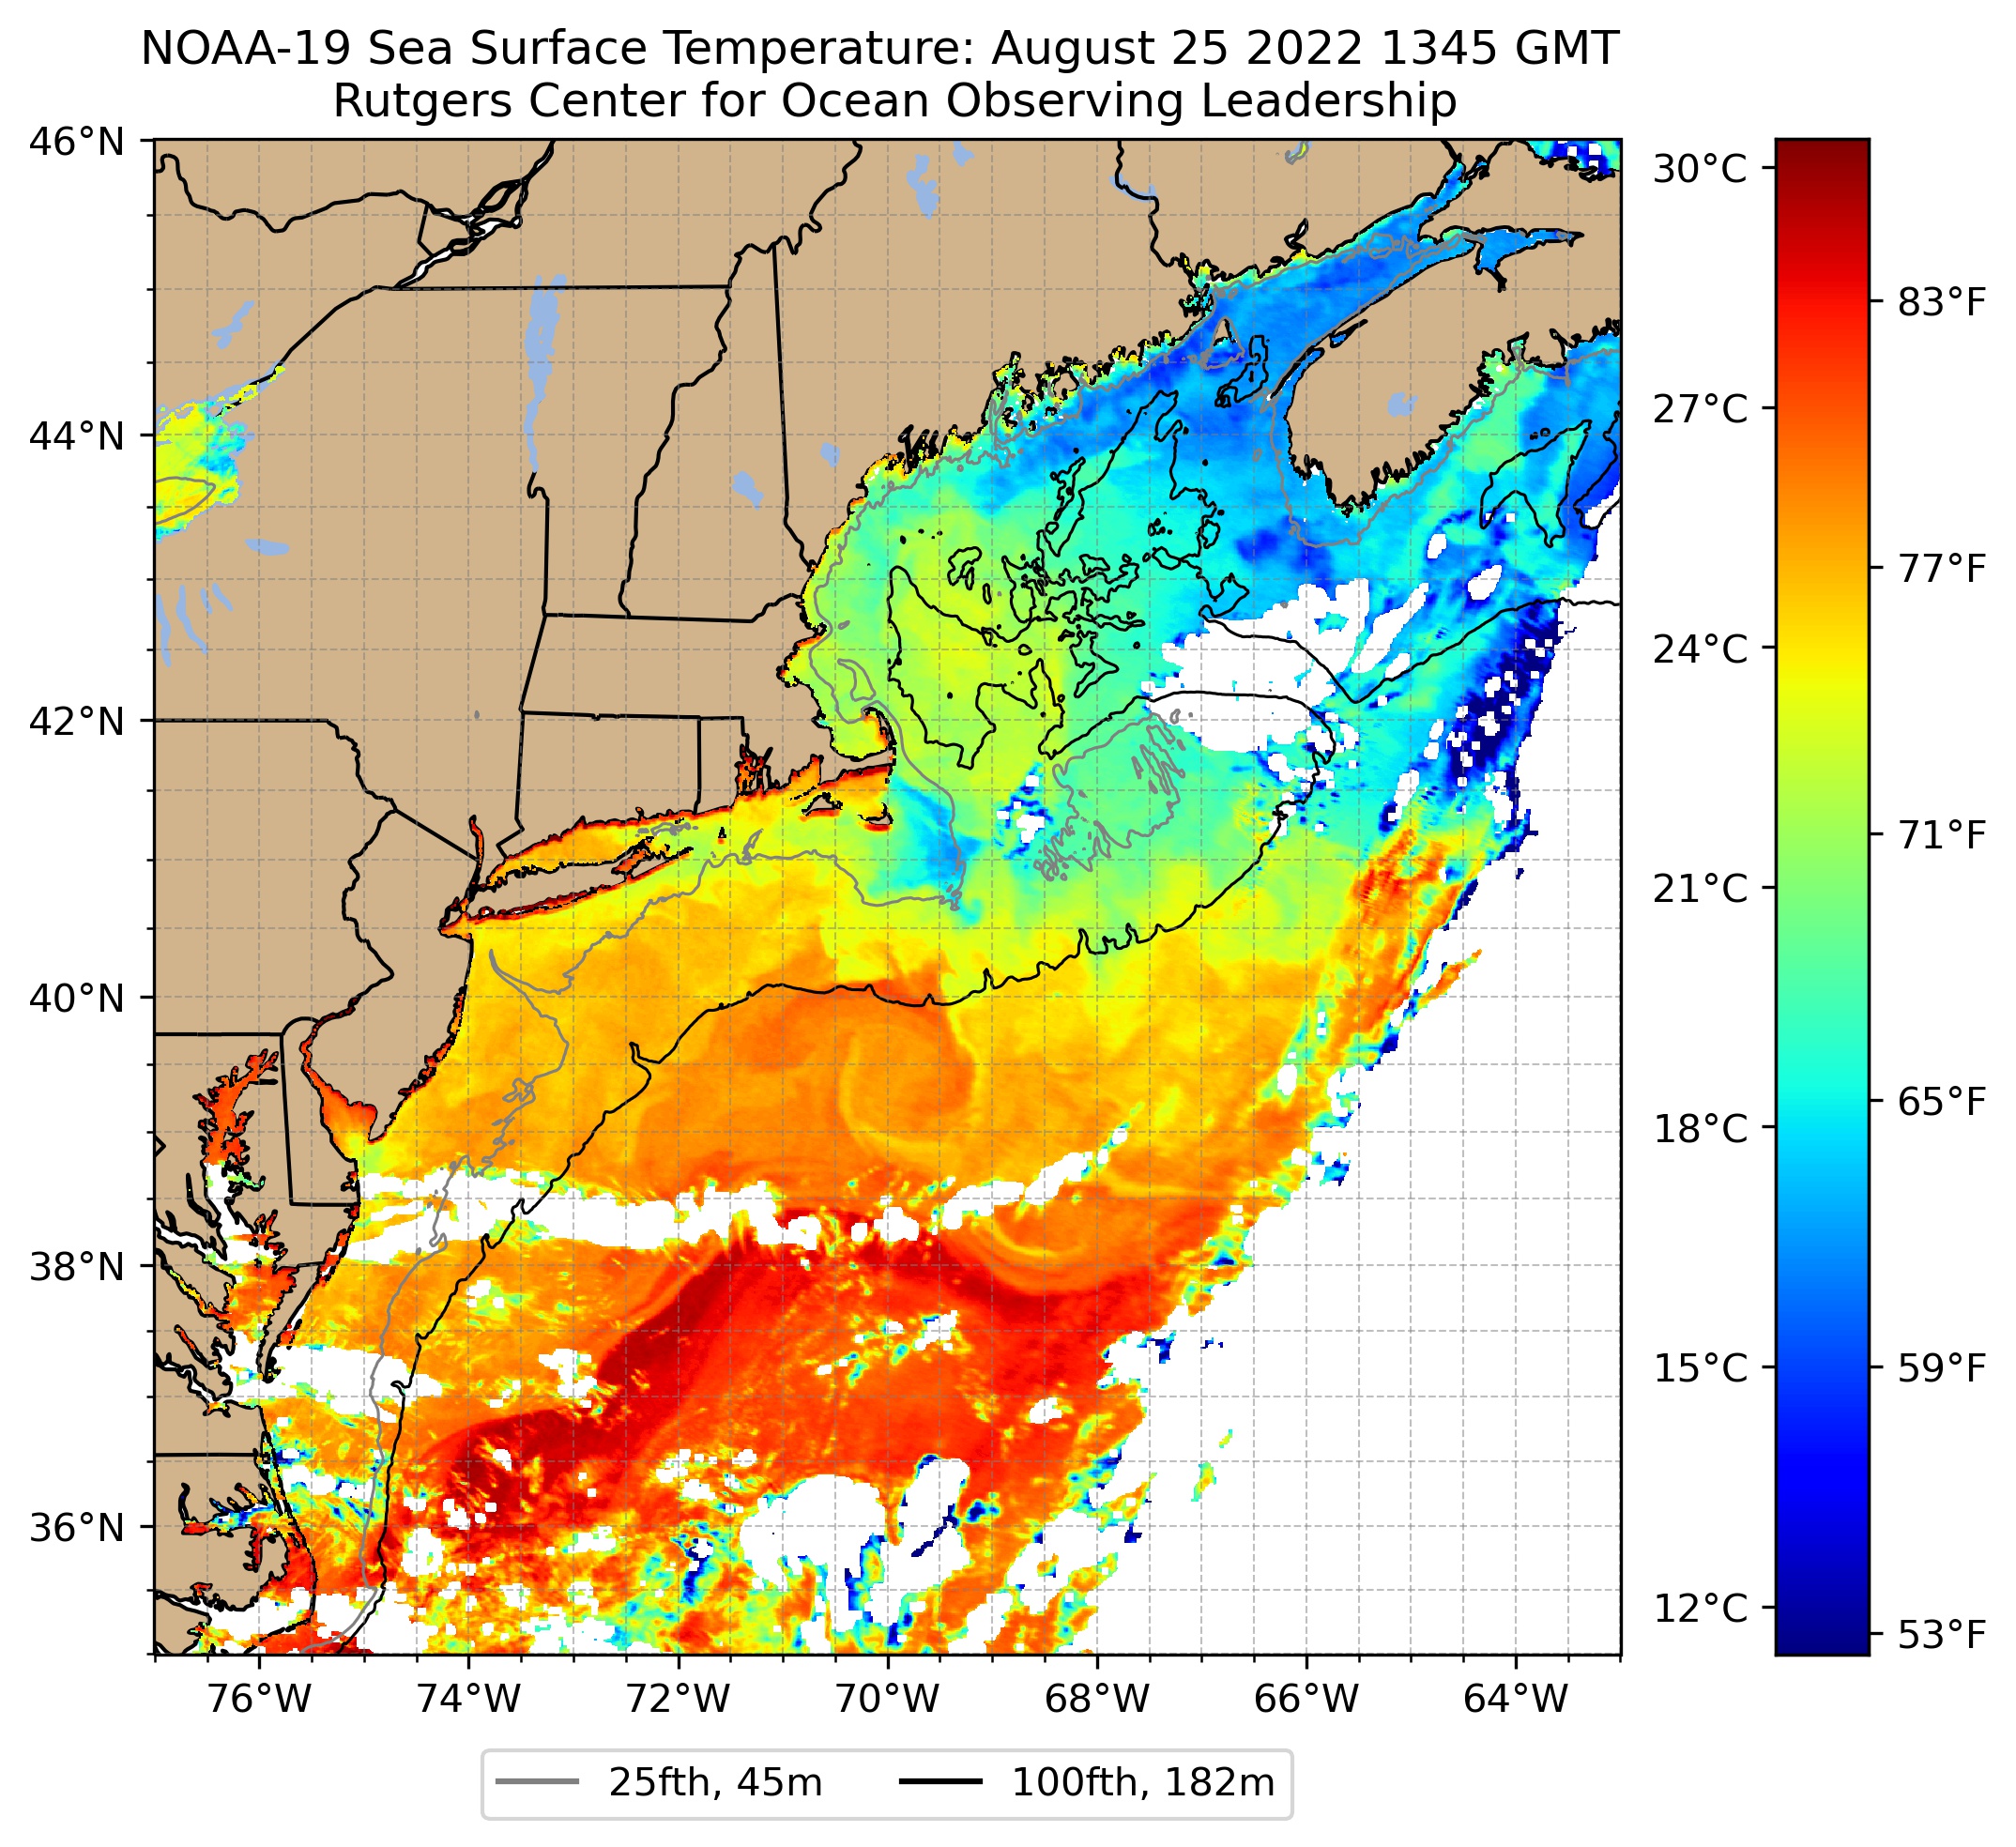 Sea Surface temperatures at 9:45 AM on August 25th based on data from the NOAA-19 satellite. Image courtesy of the Rutgers Center for Ocean Observing Leadership.